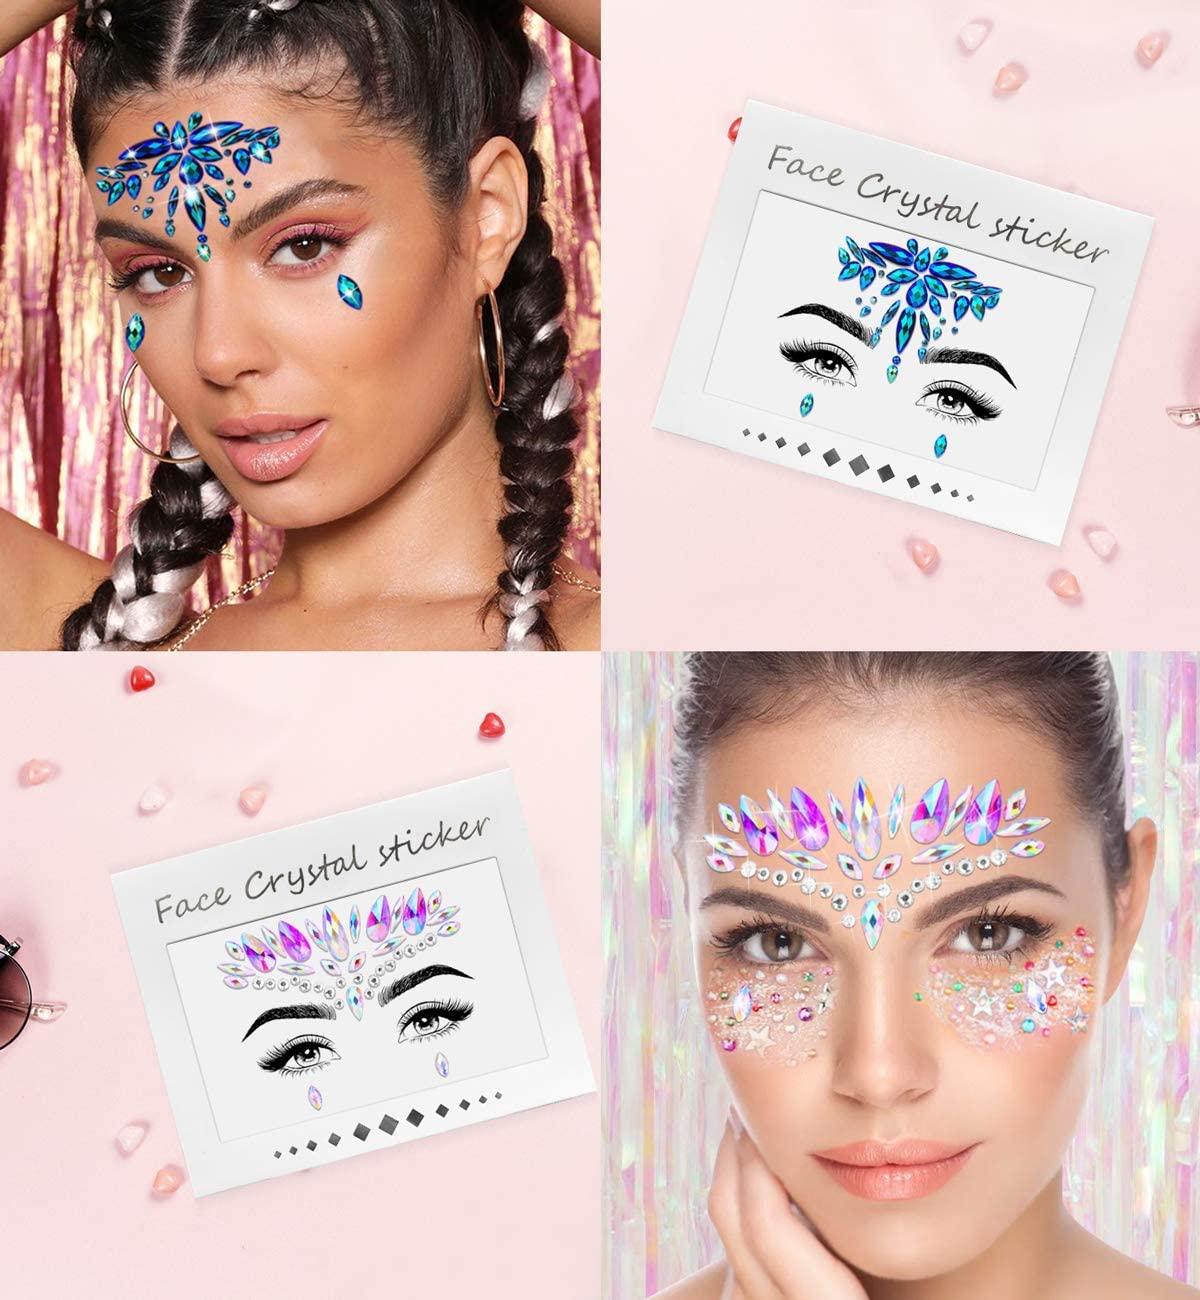 Face Rhinestones New Festival Accessories Makeup Crystals Face